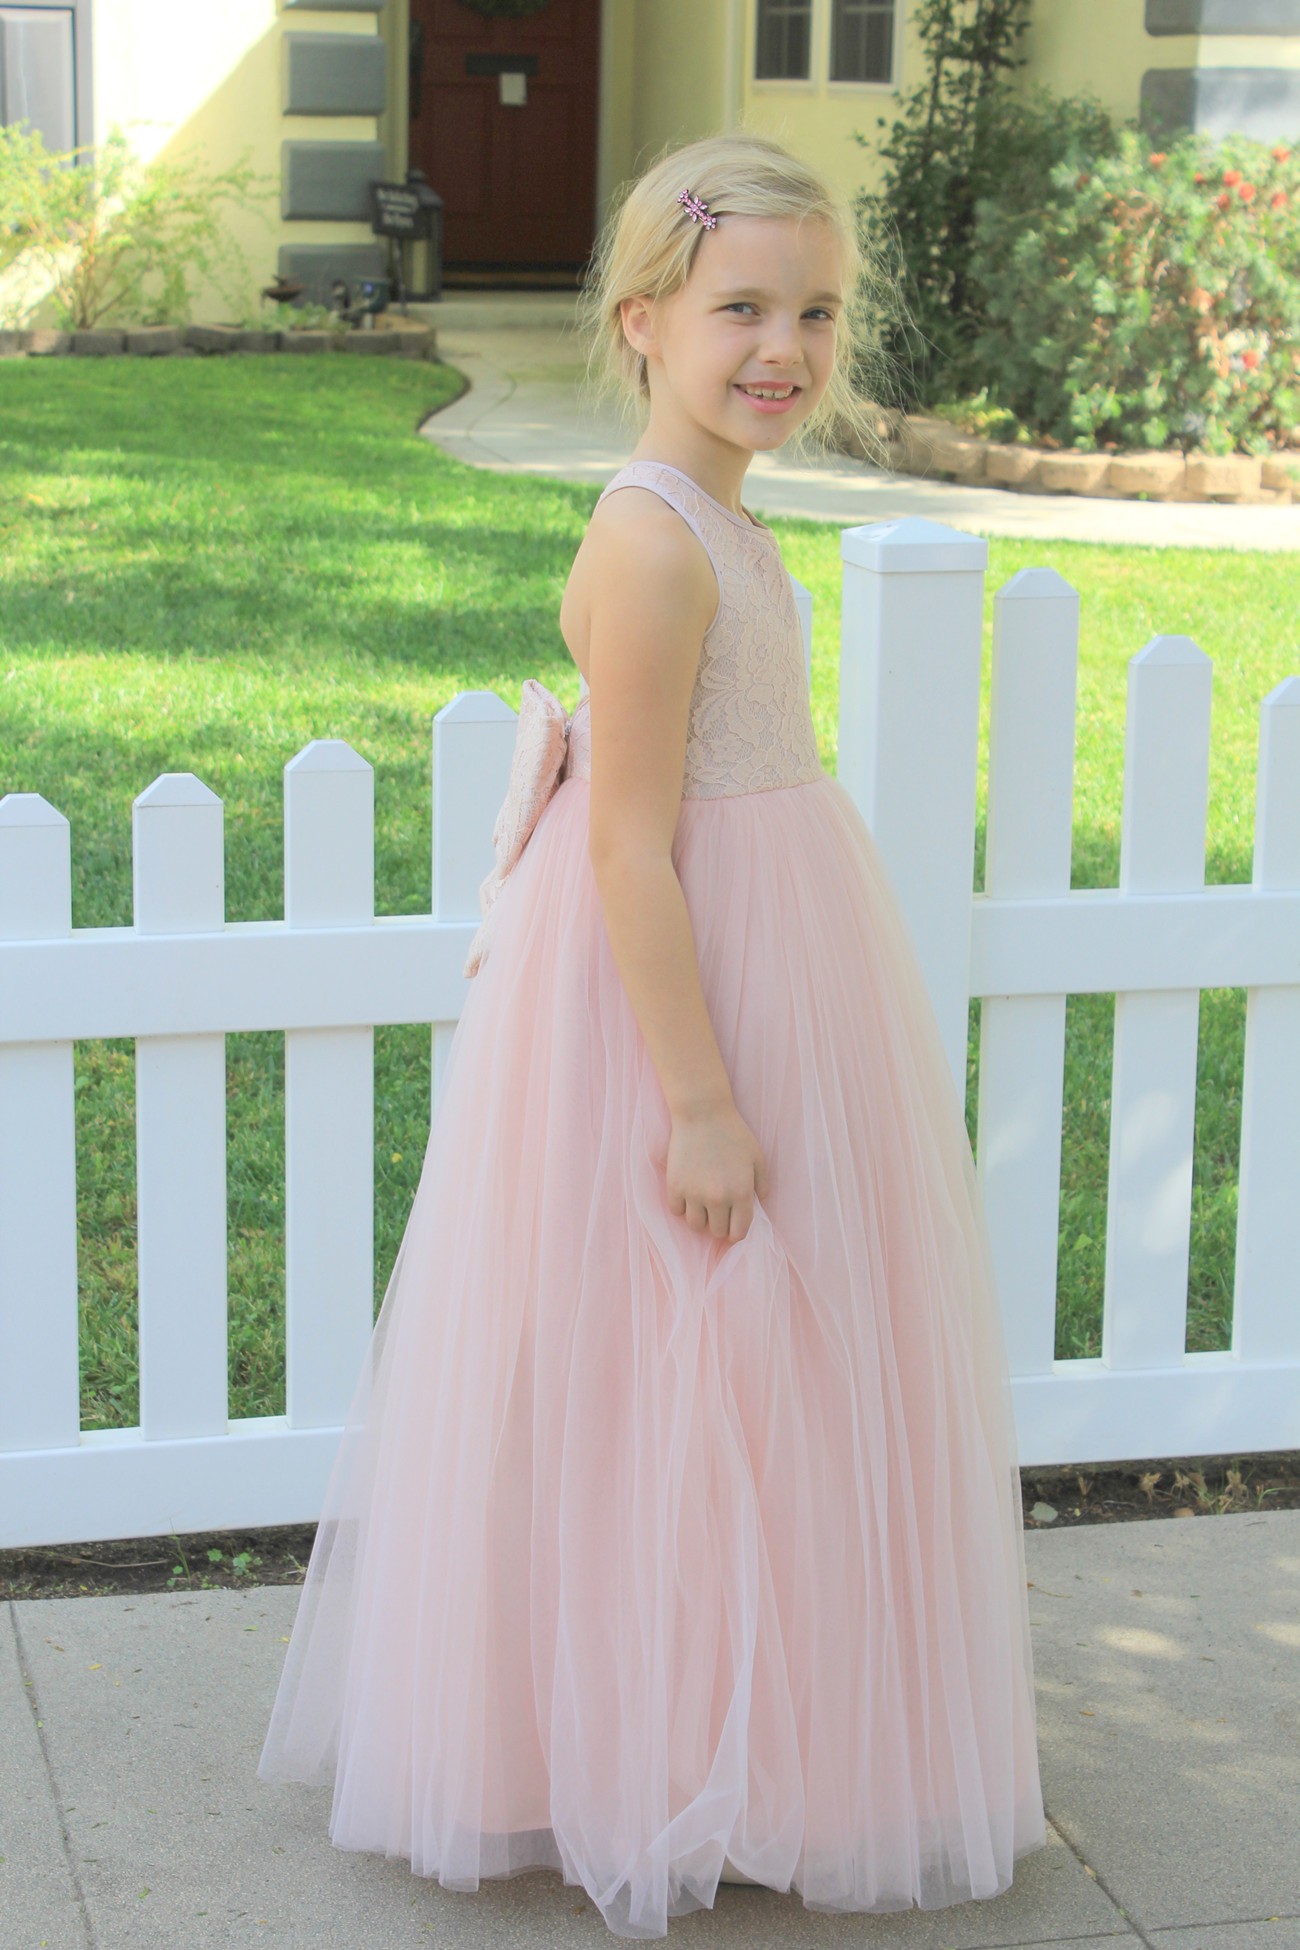 Blush Pink Crossed Straps Lace Flower Girl Dress 204